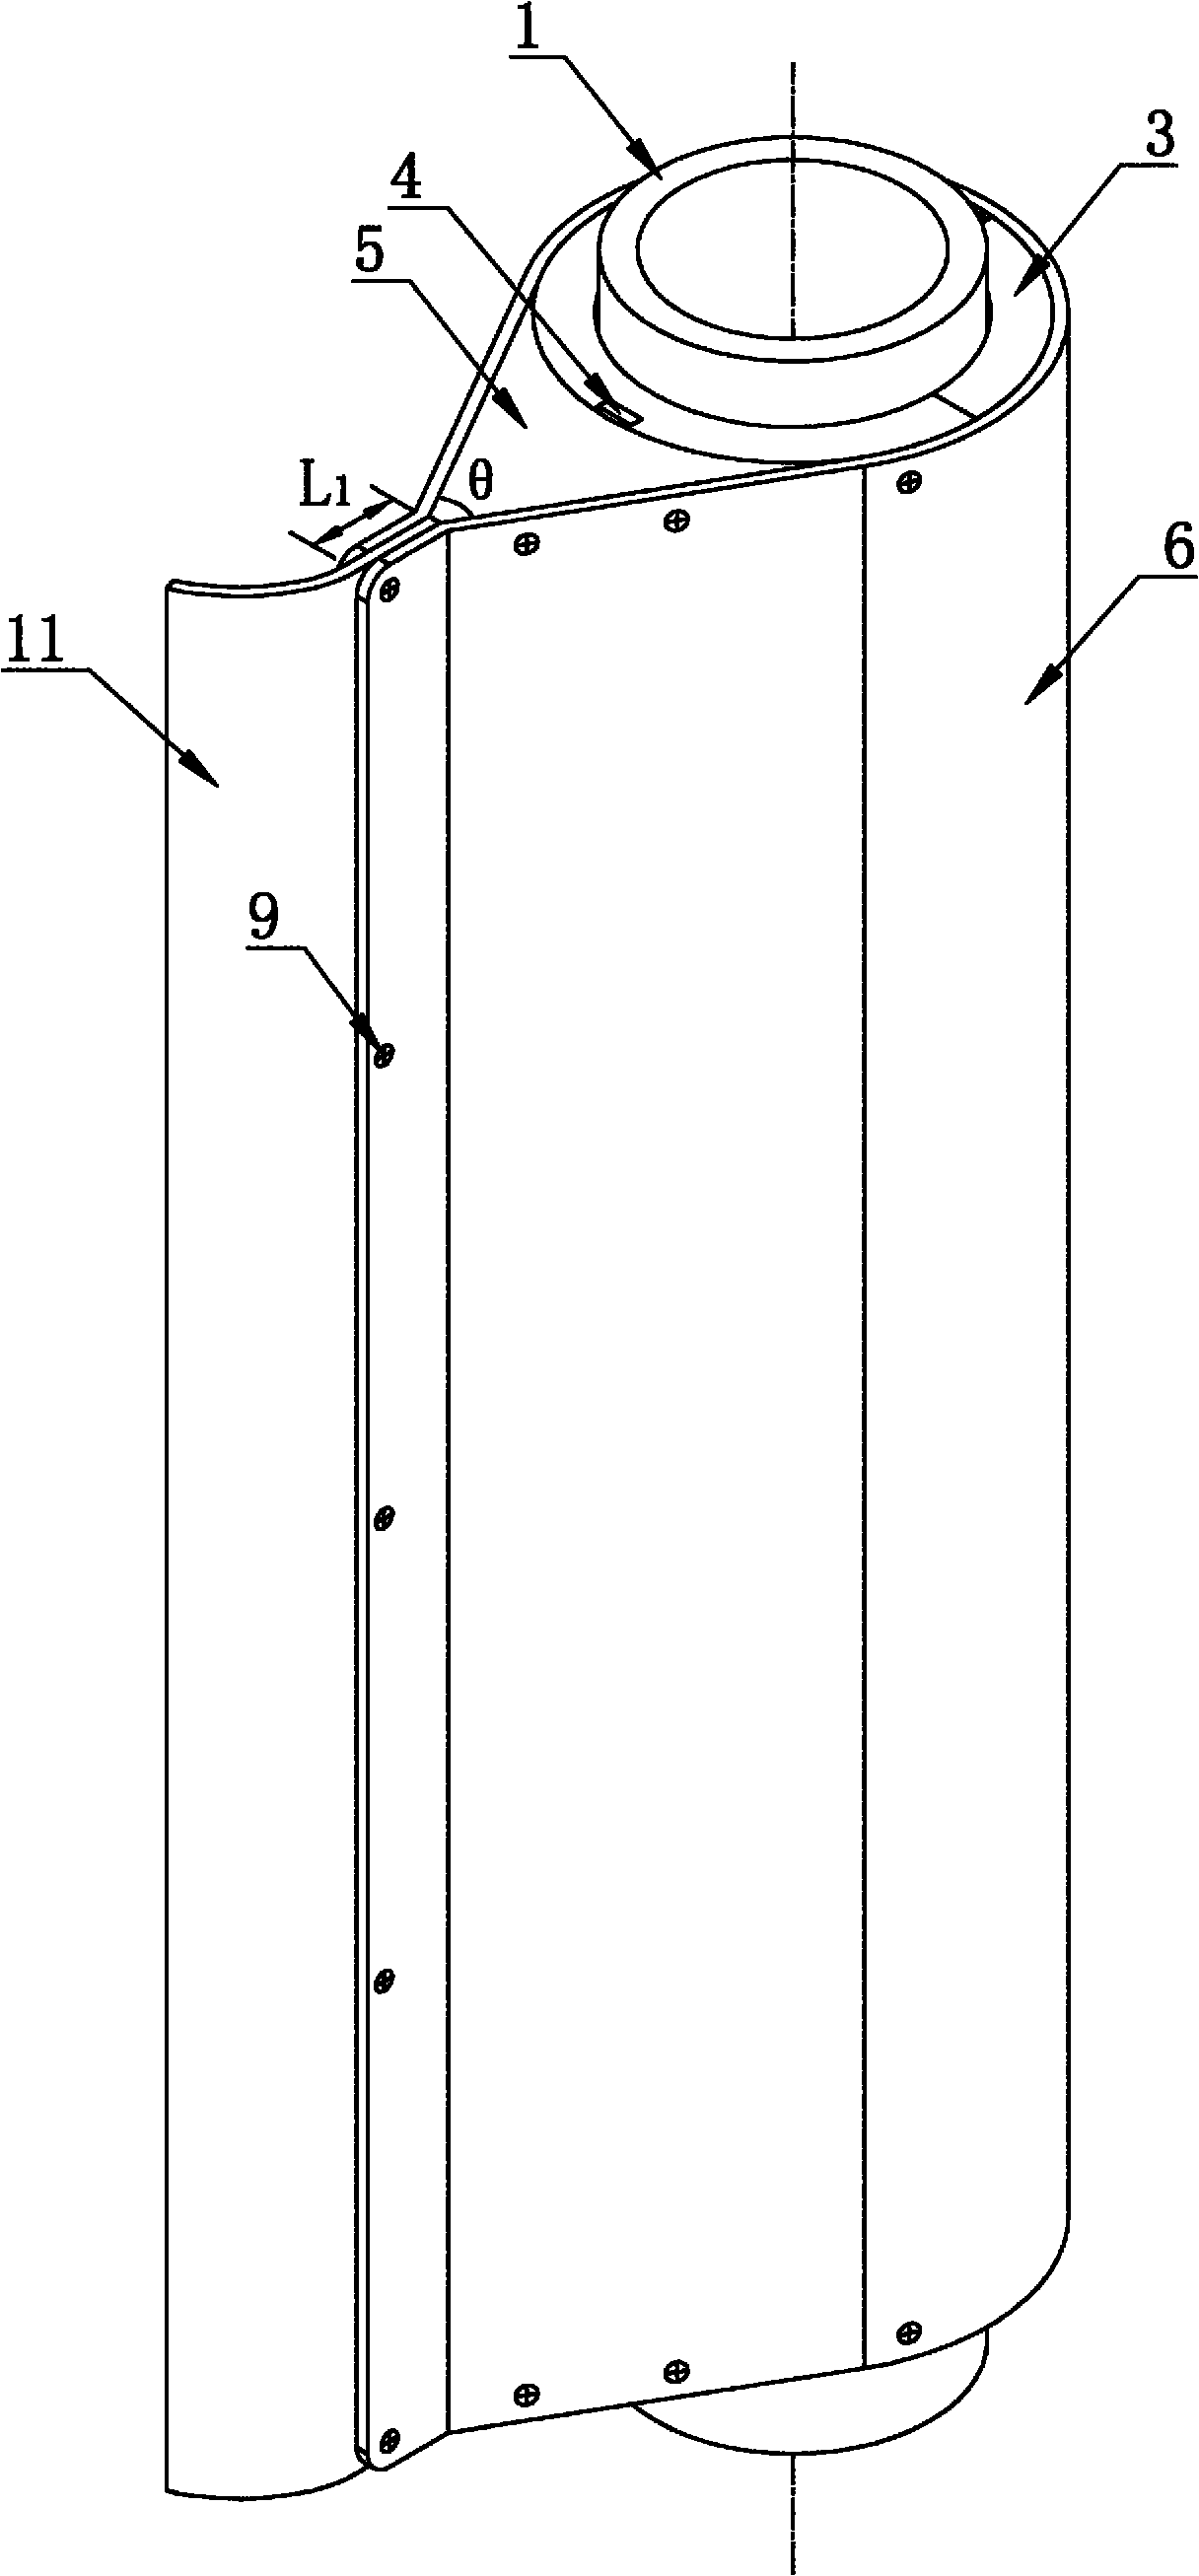 Device for inhibiting vortex-induced vibration of underwater standpipe of fish-tail imitating cowling